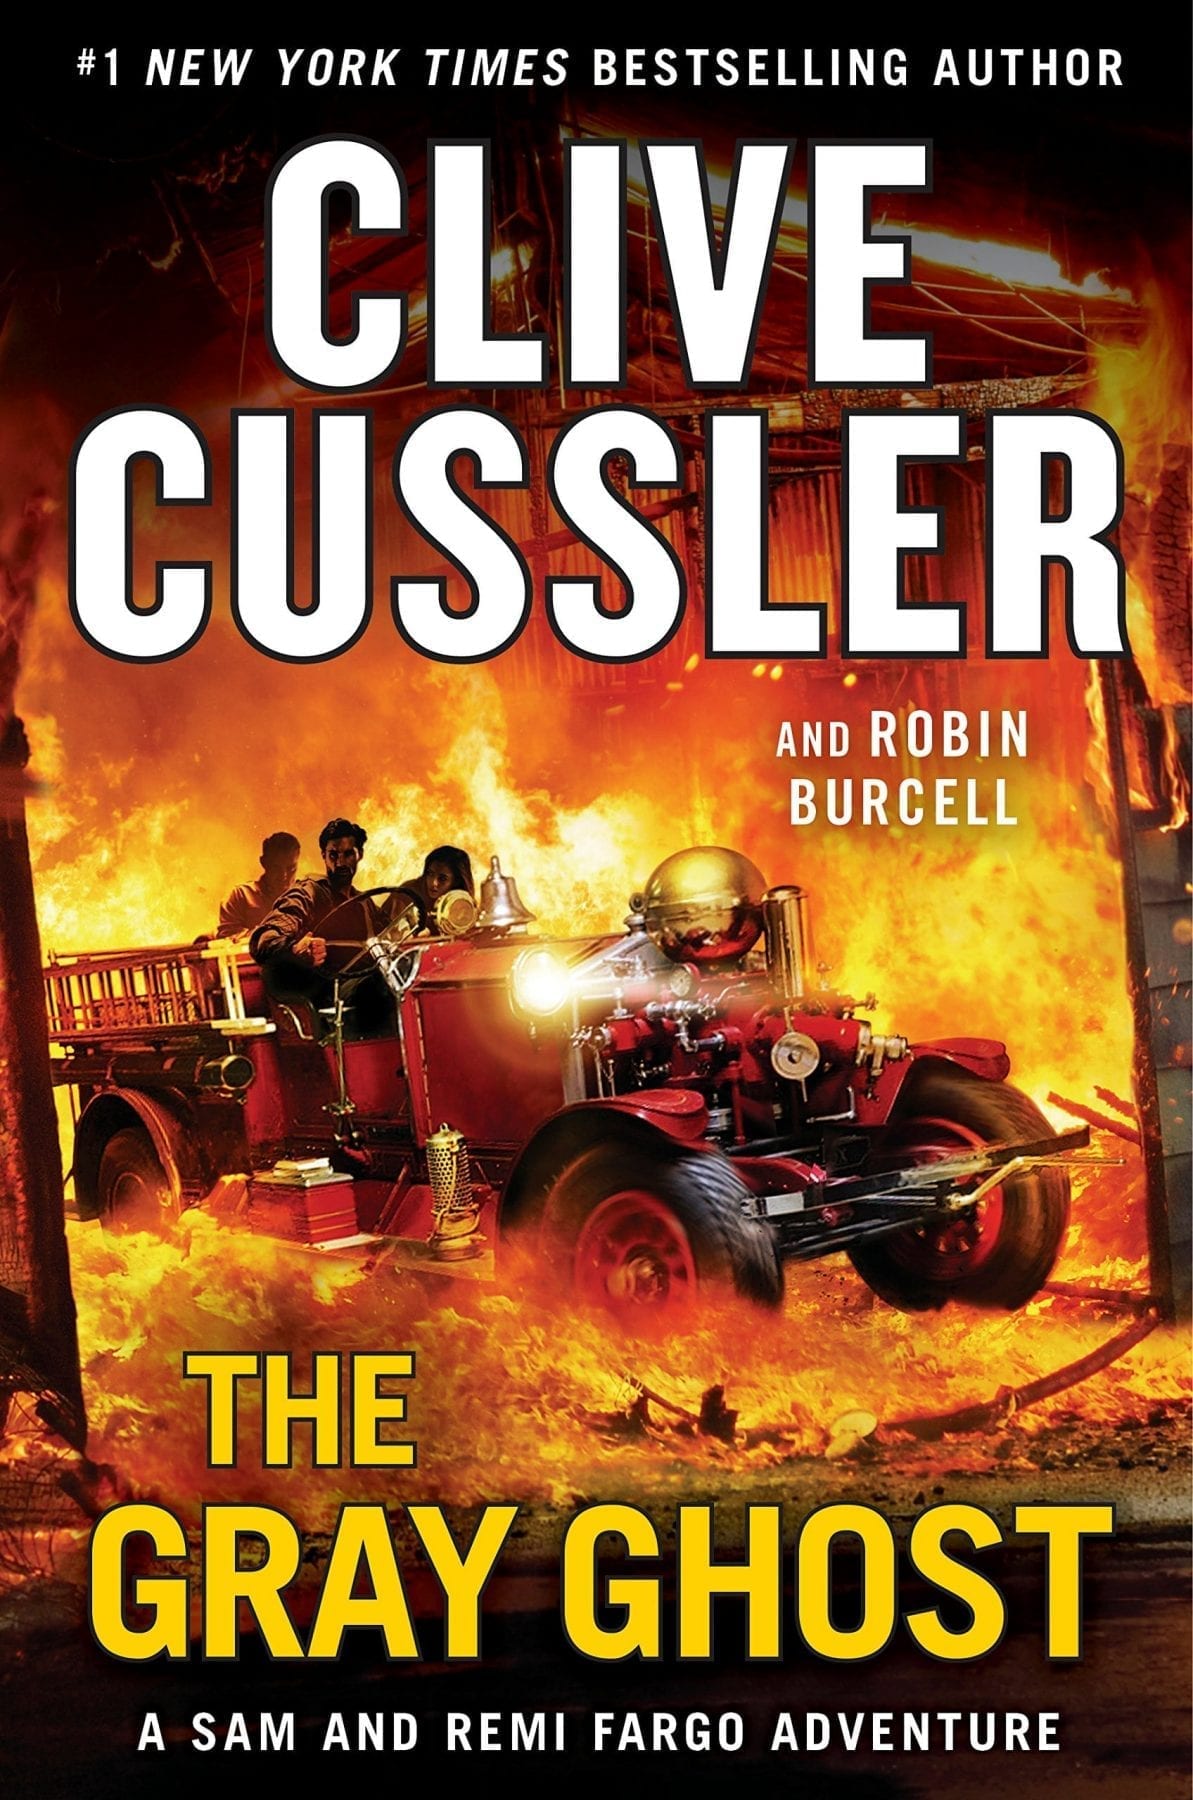 The Gray Ghost by Clive Cussler